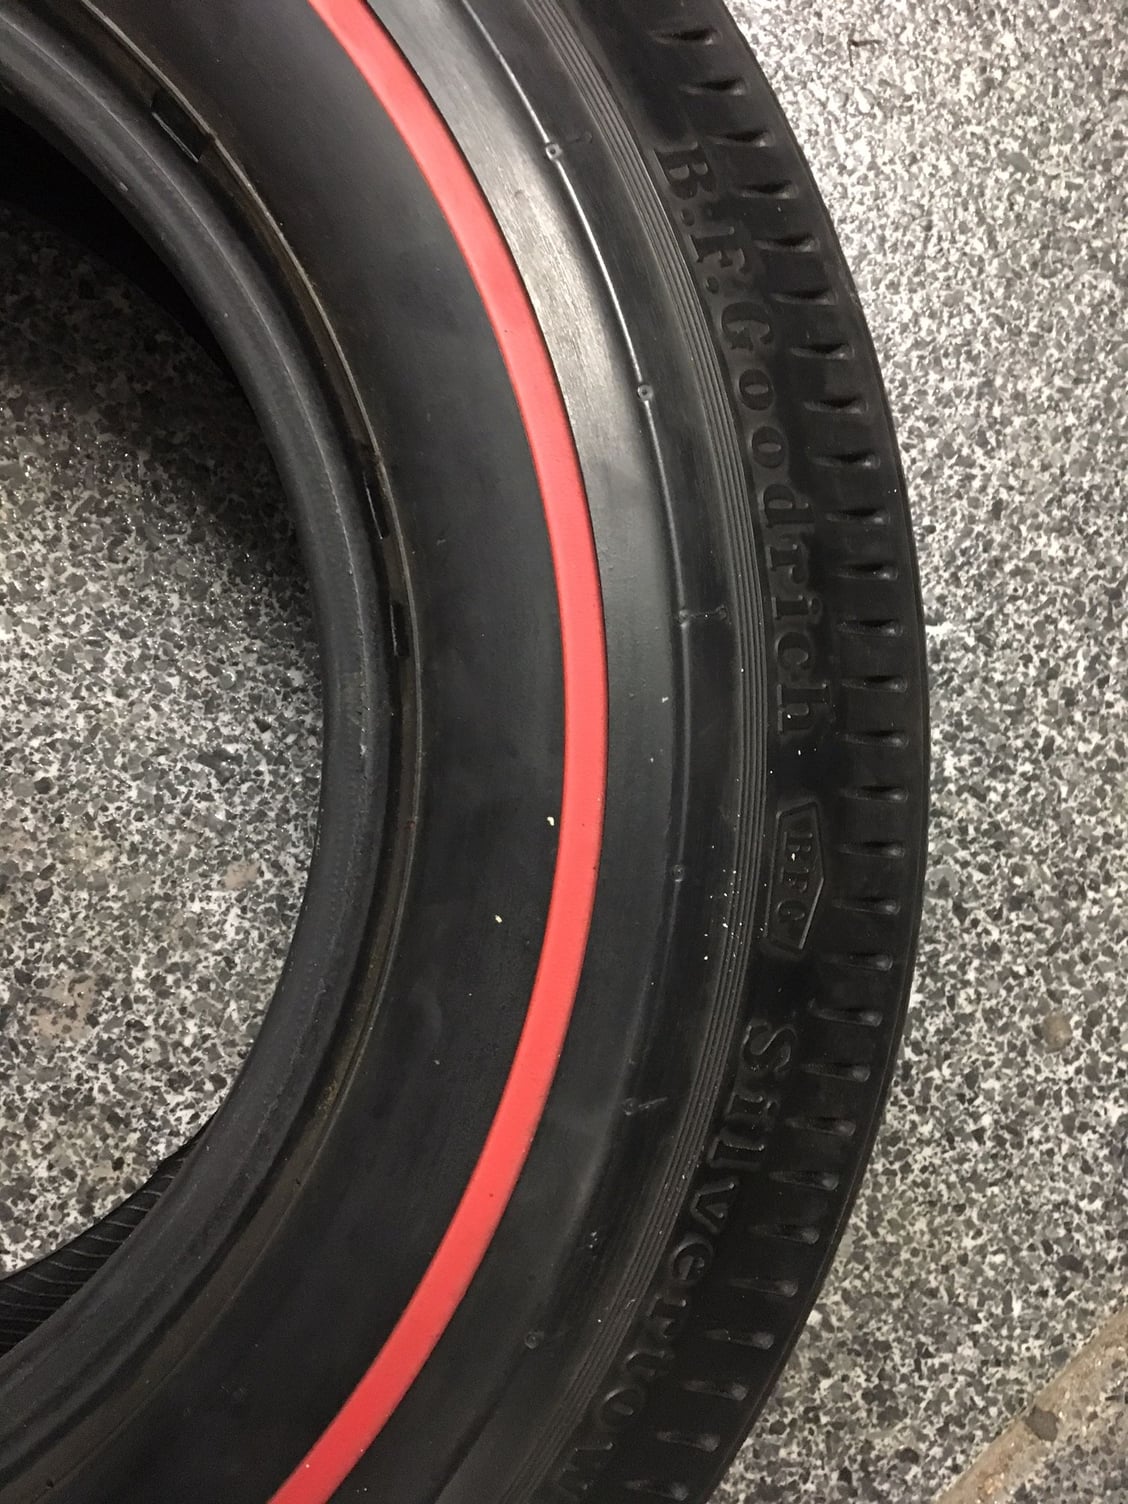 where to take old tires near me